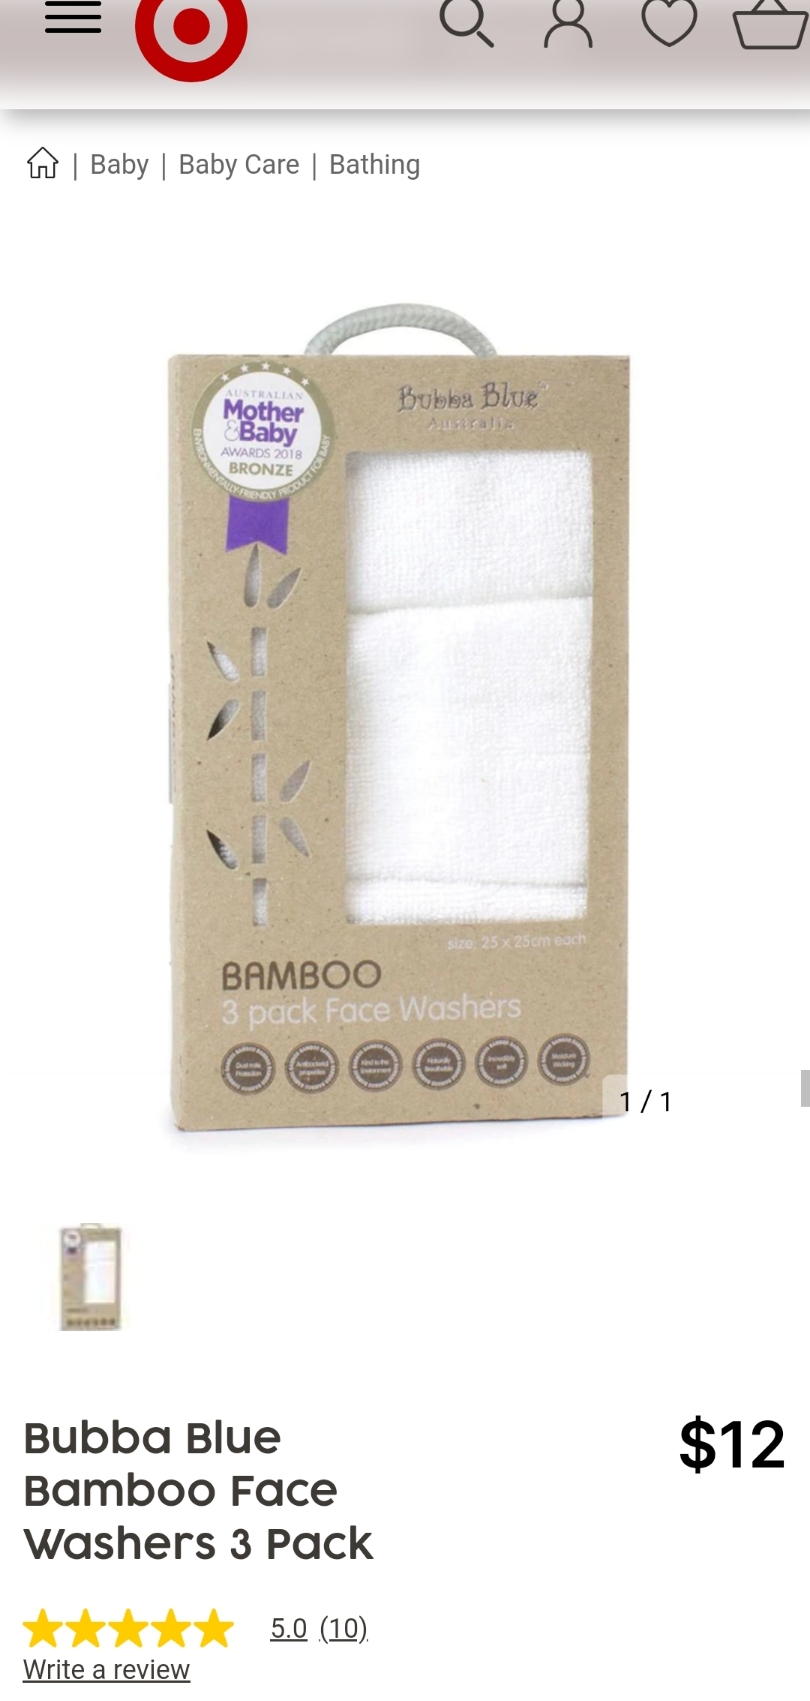 Bamboo face washers 3 pack